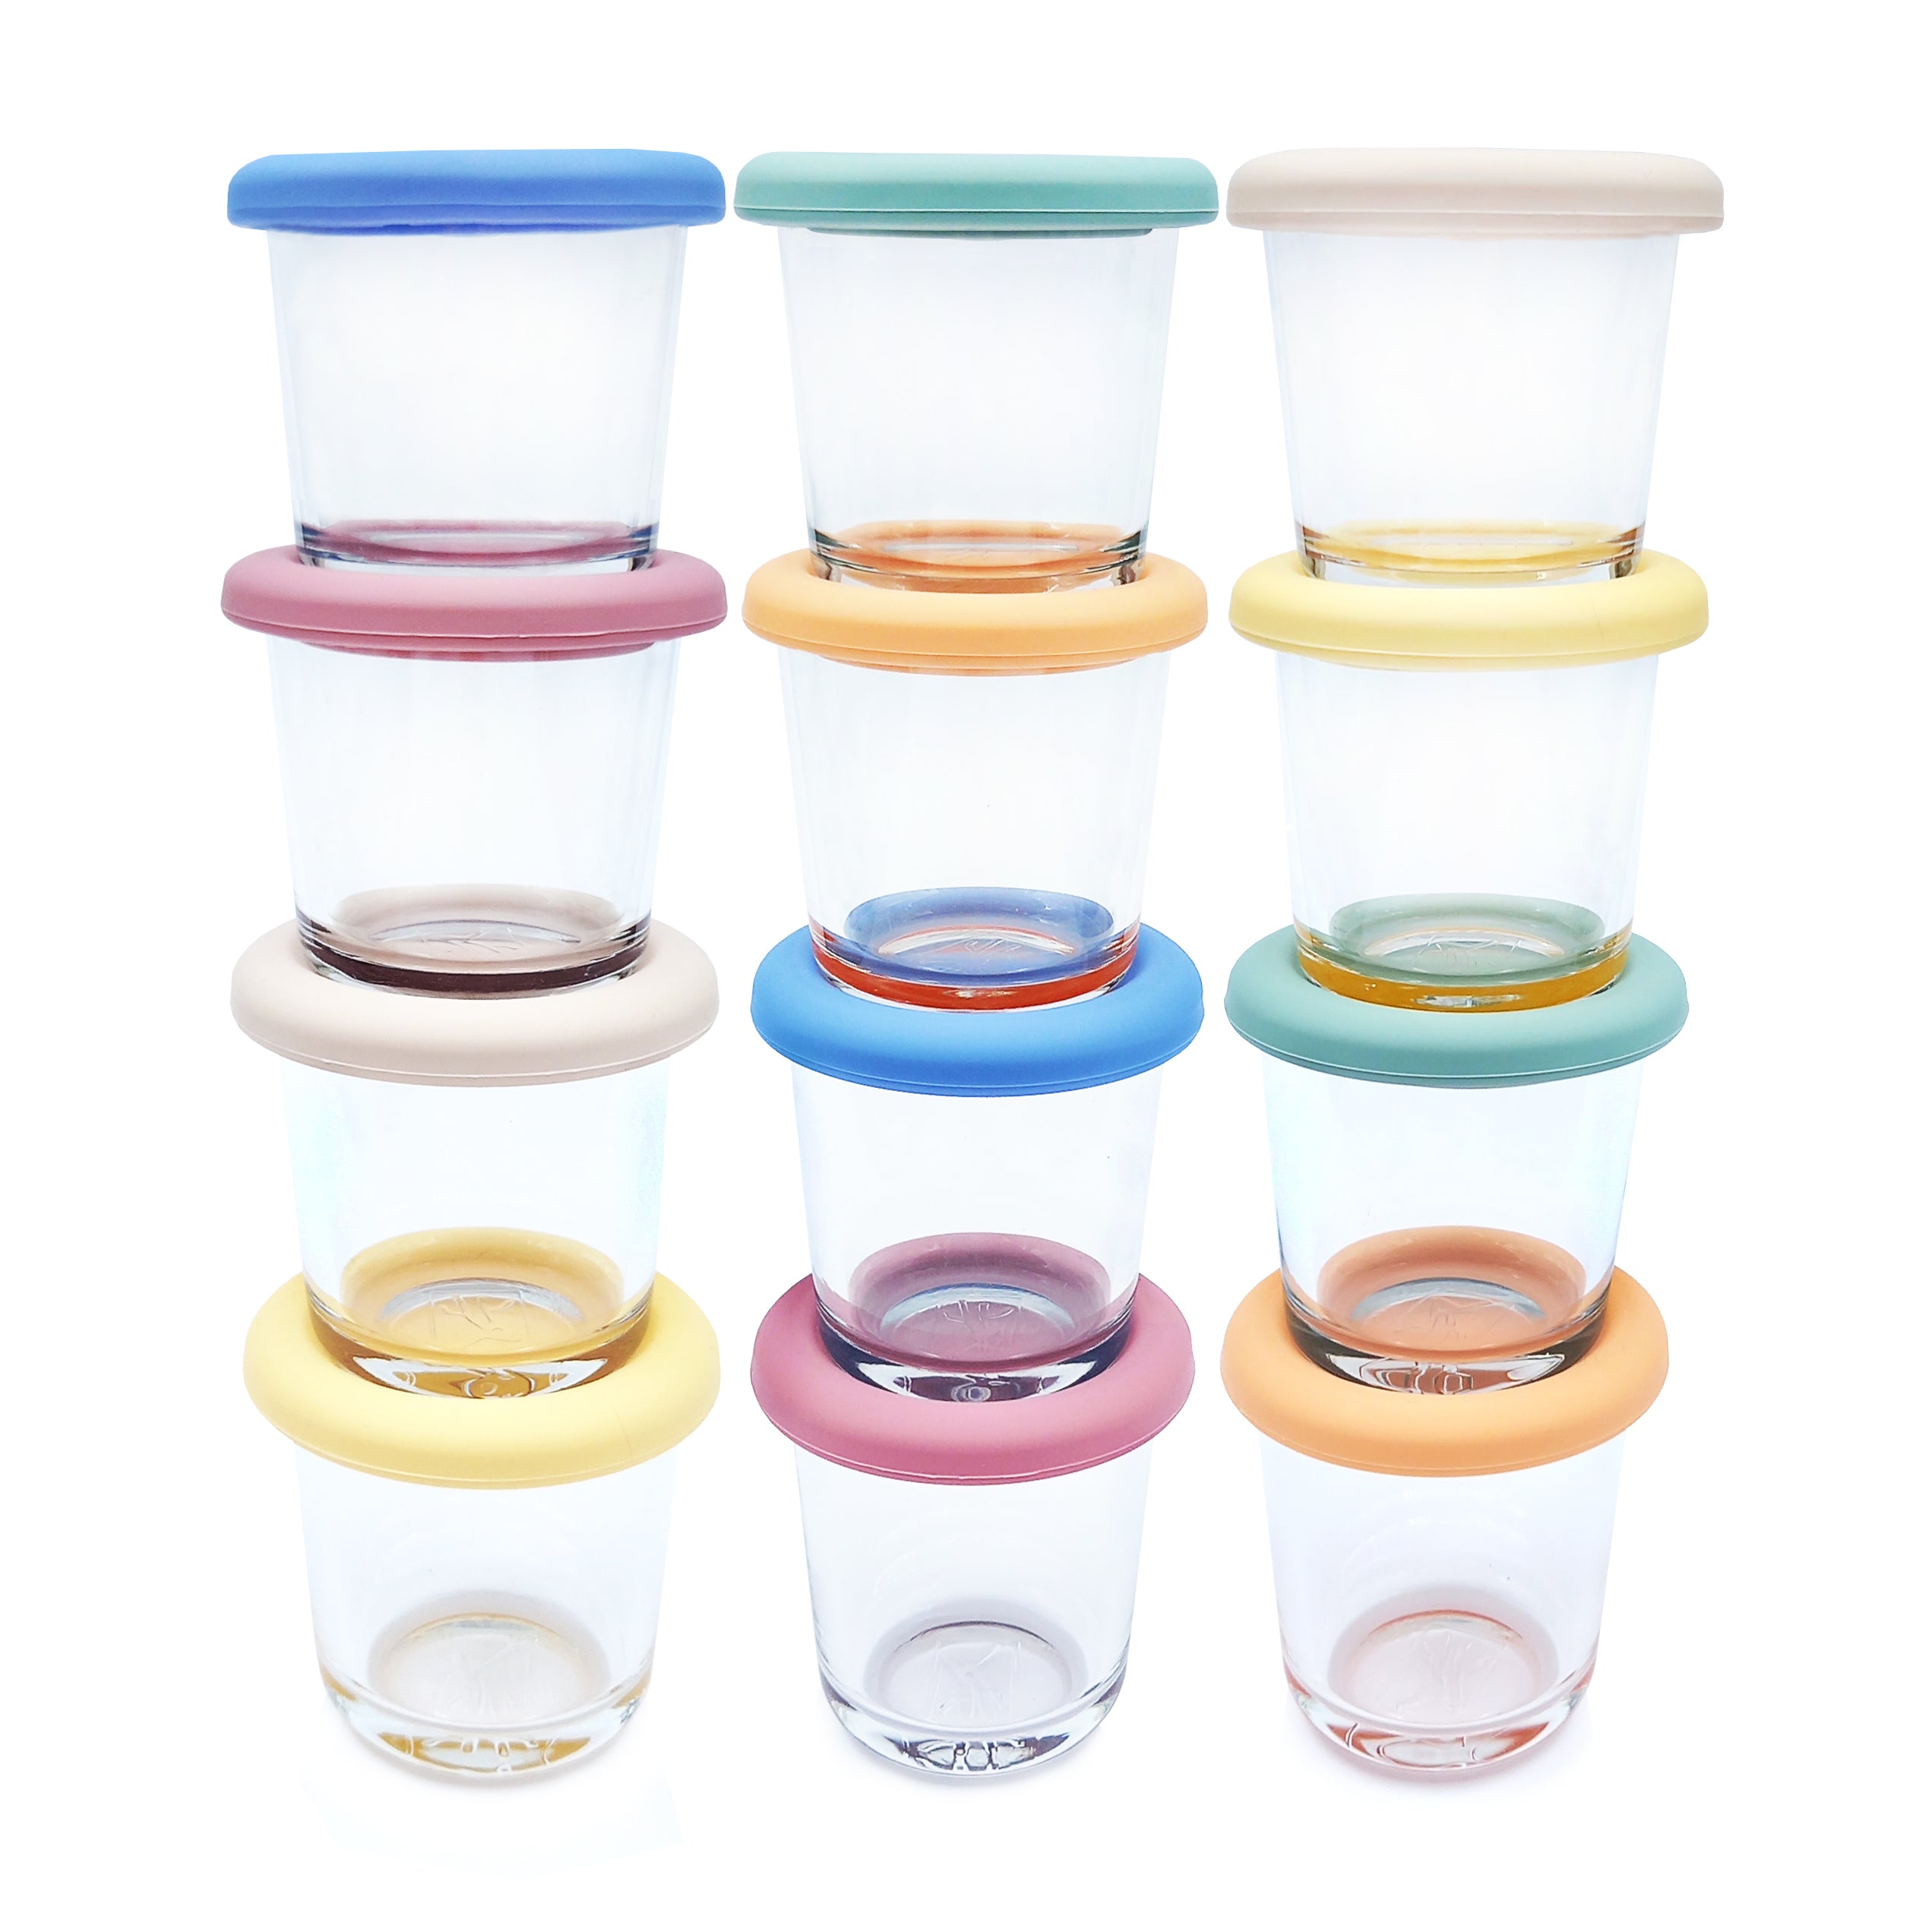  Matyz 4-Pack Glass Baby Food Jars with Lids Airtight Freezer  Microwave Oven Safe (Mint Green, 4 OZ Each) - Small Solid Food Storage  Containers Baby Stackable Baby Food Containers Glass : Baby